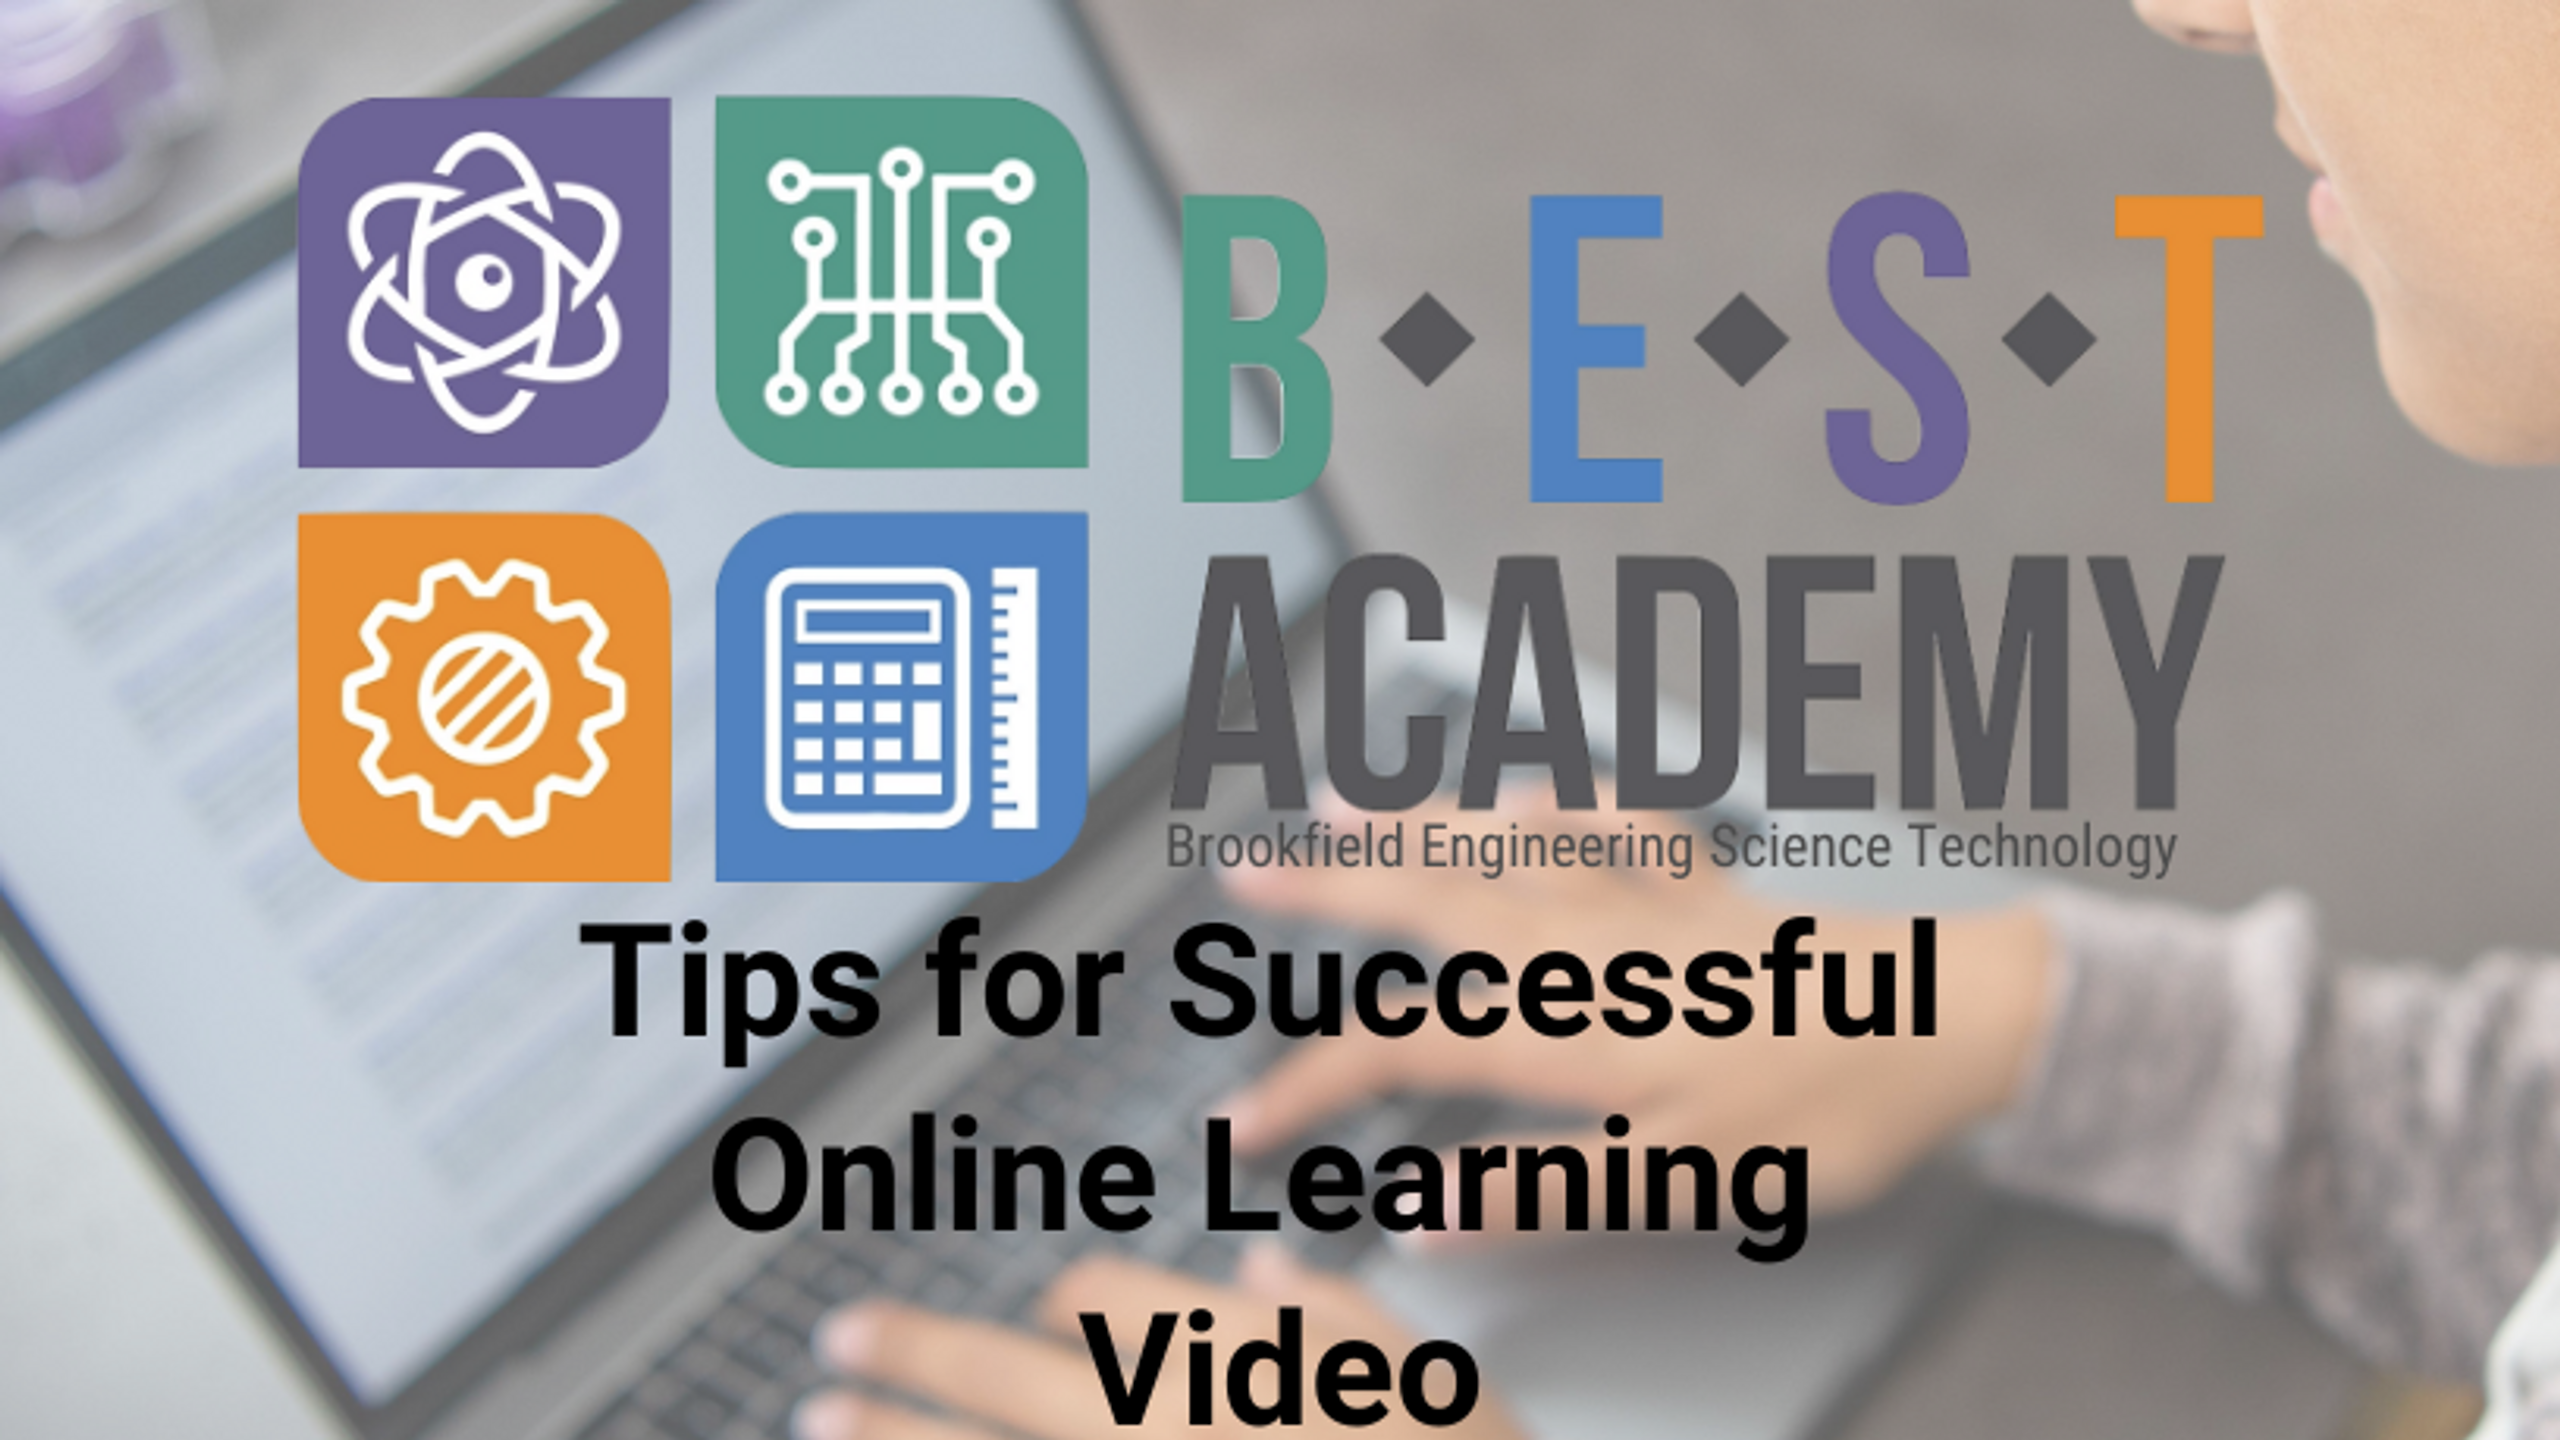 Welcome to BEST Academy Video